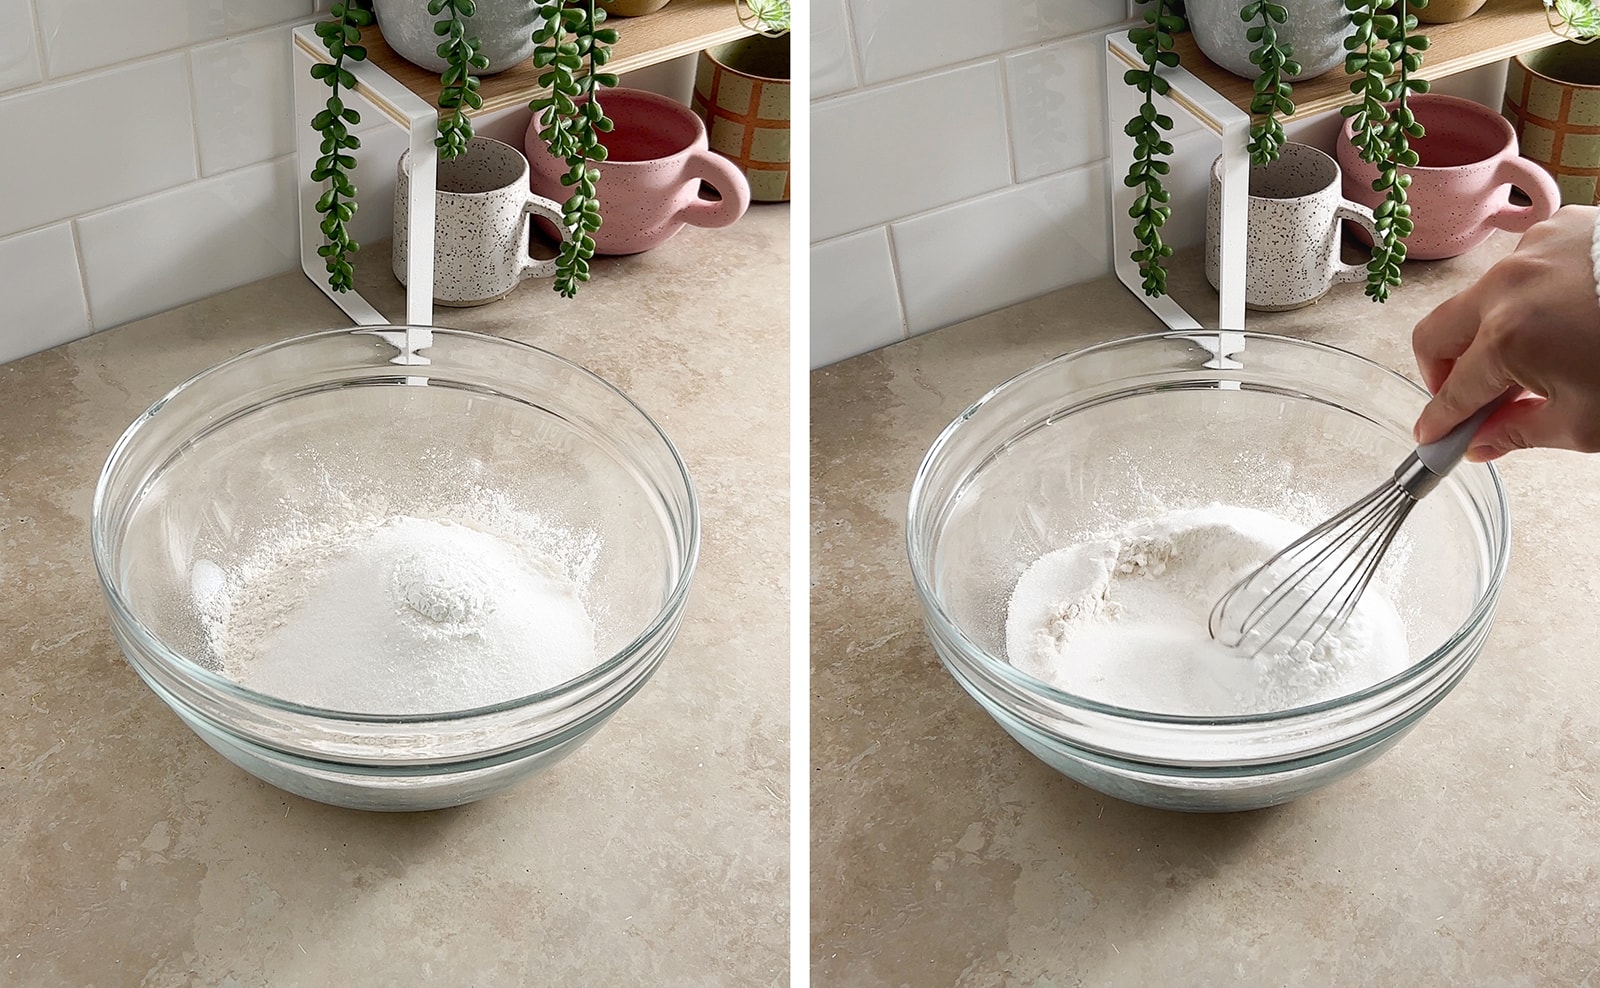 Left to right: dry ingredients in a mixing bowl, whisking dry ingredients in mixing bowl.